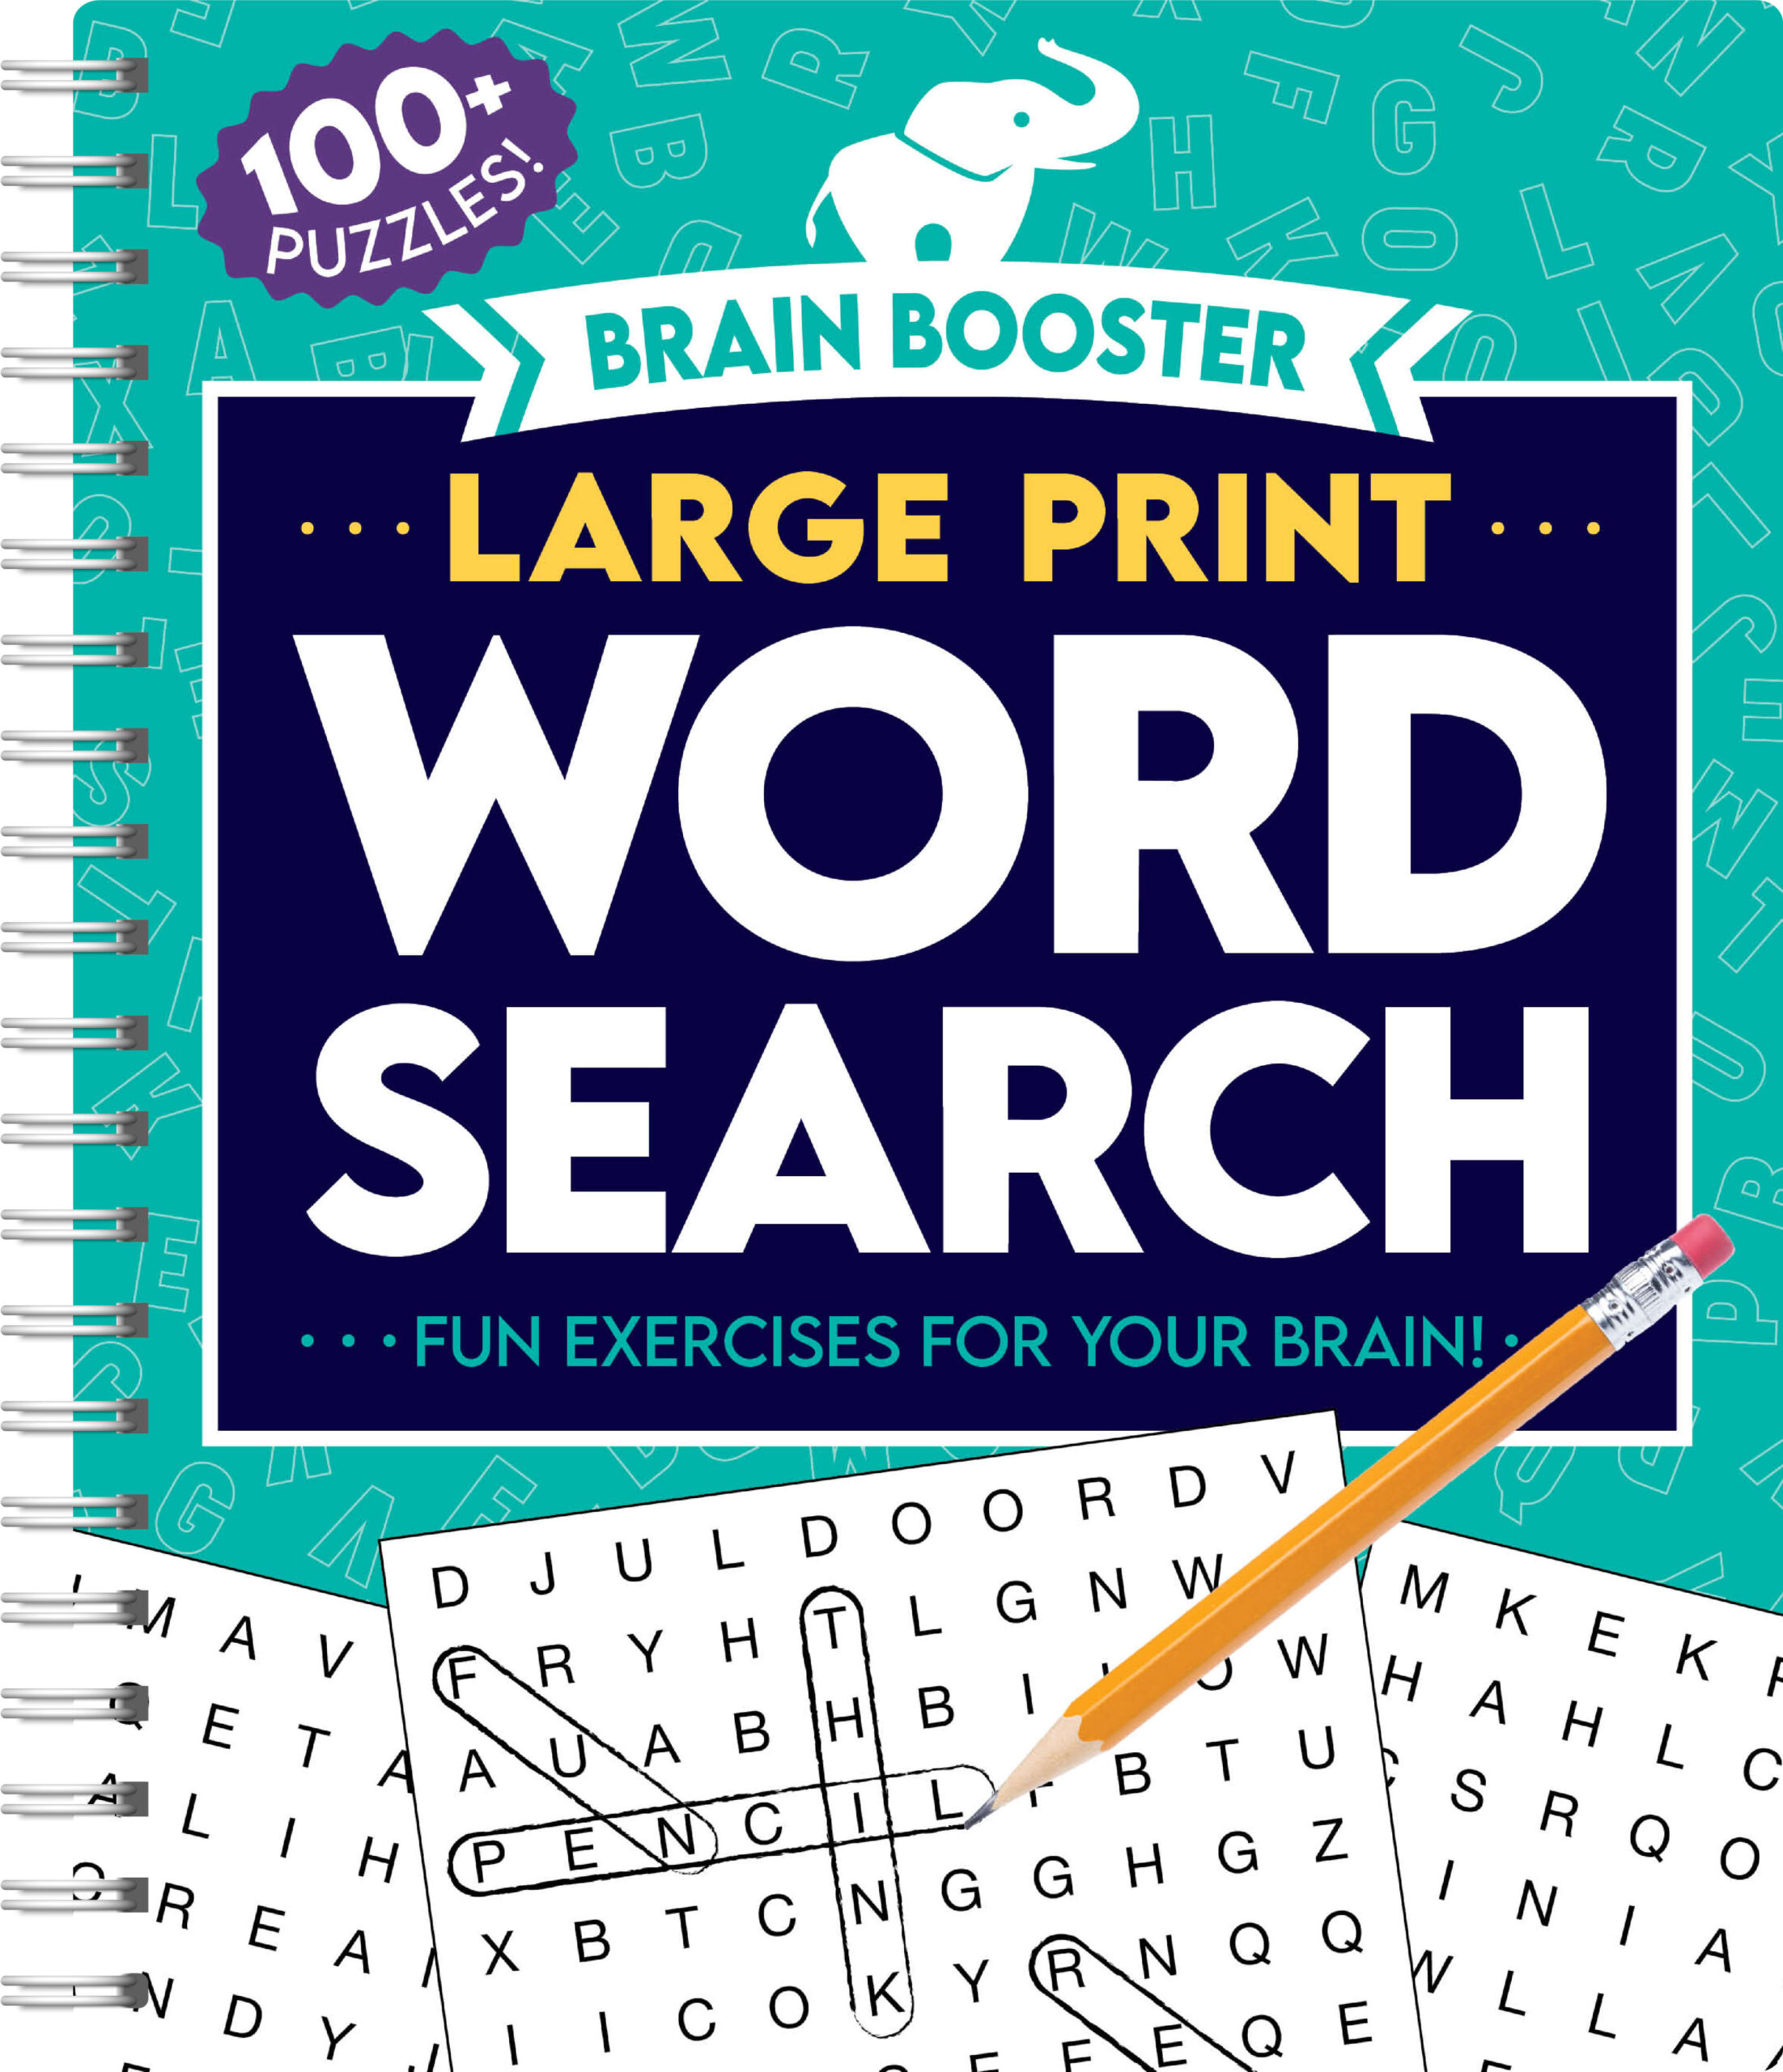 Brain Booster: Large Print Word Search